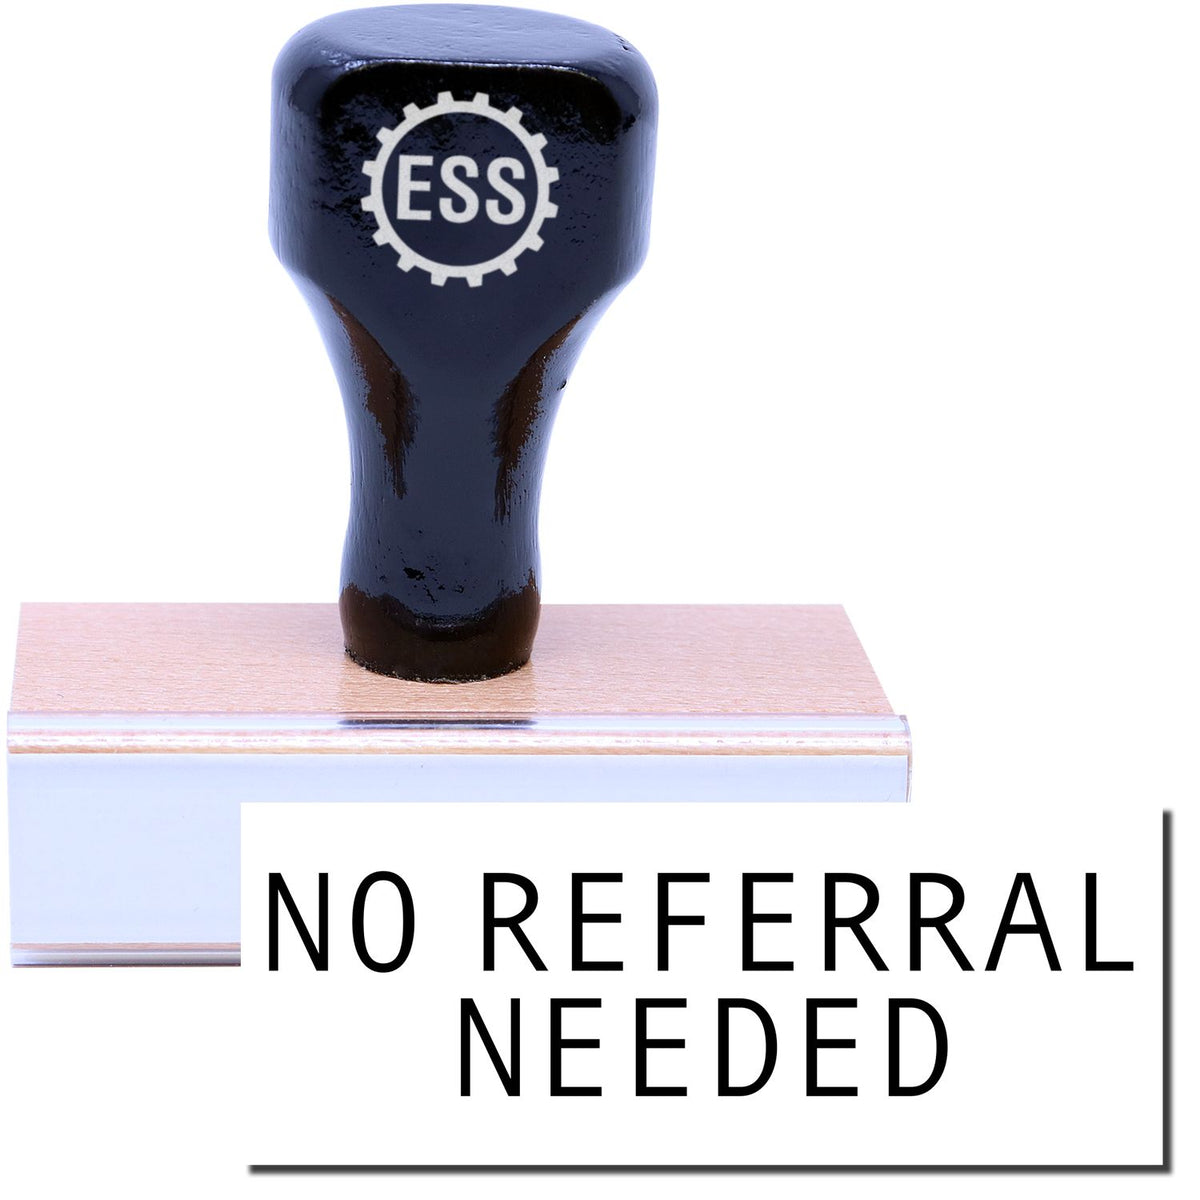 A stock office rubber stamp with a stamped image showing how the text &quot;NO REFERRAL NEEDED&quot; in a large font is displayed after stamping.